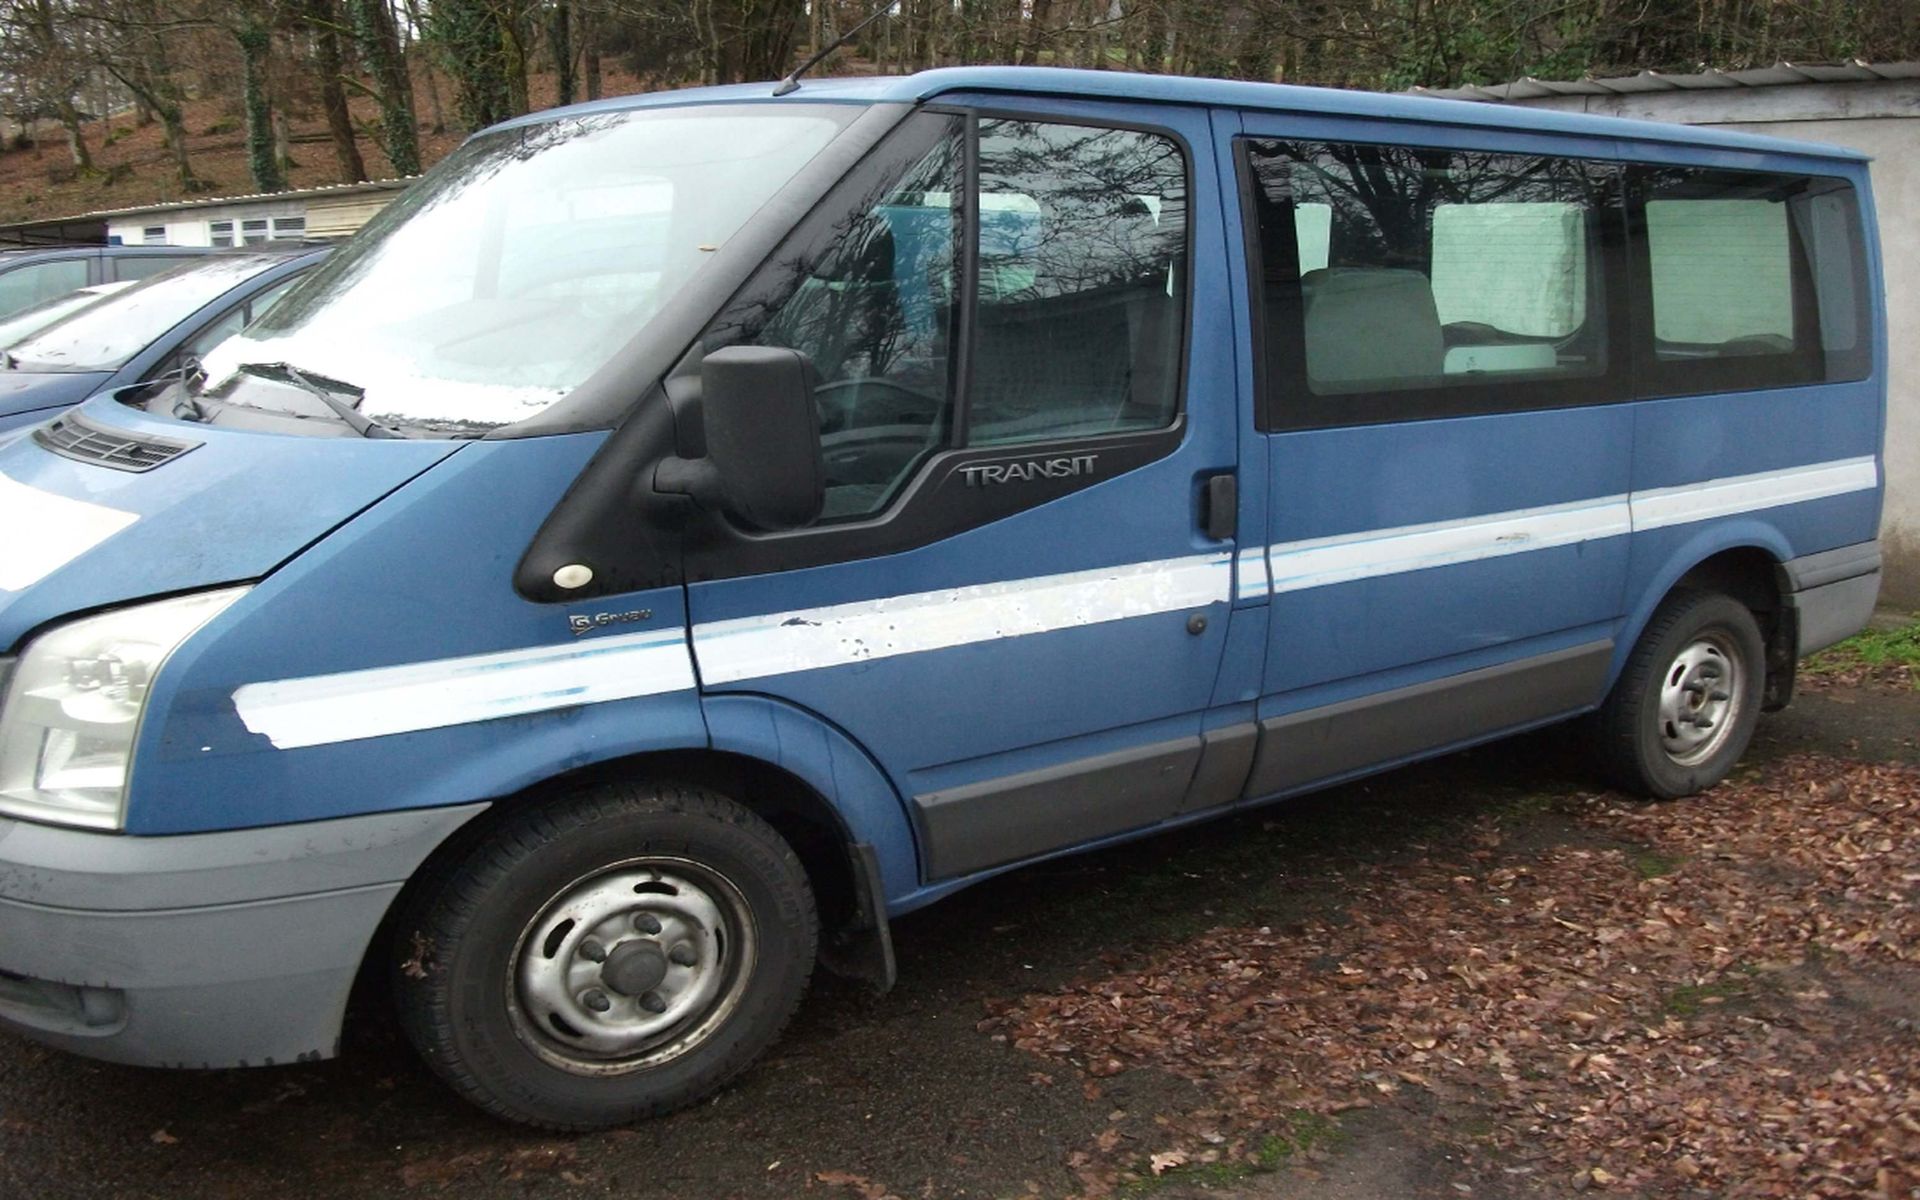 Null [RP] Reserved for automotive professionals.
FORD Transit 2.2 Tdci 115, Dies&hellip;